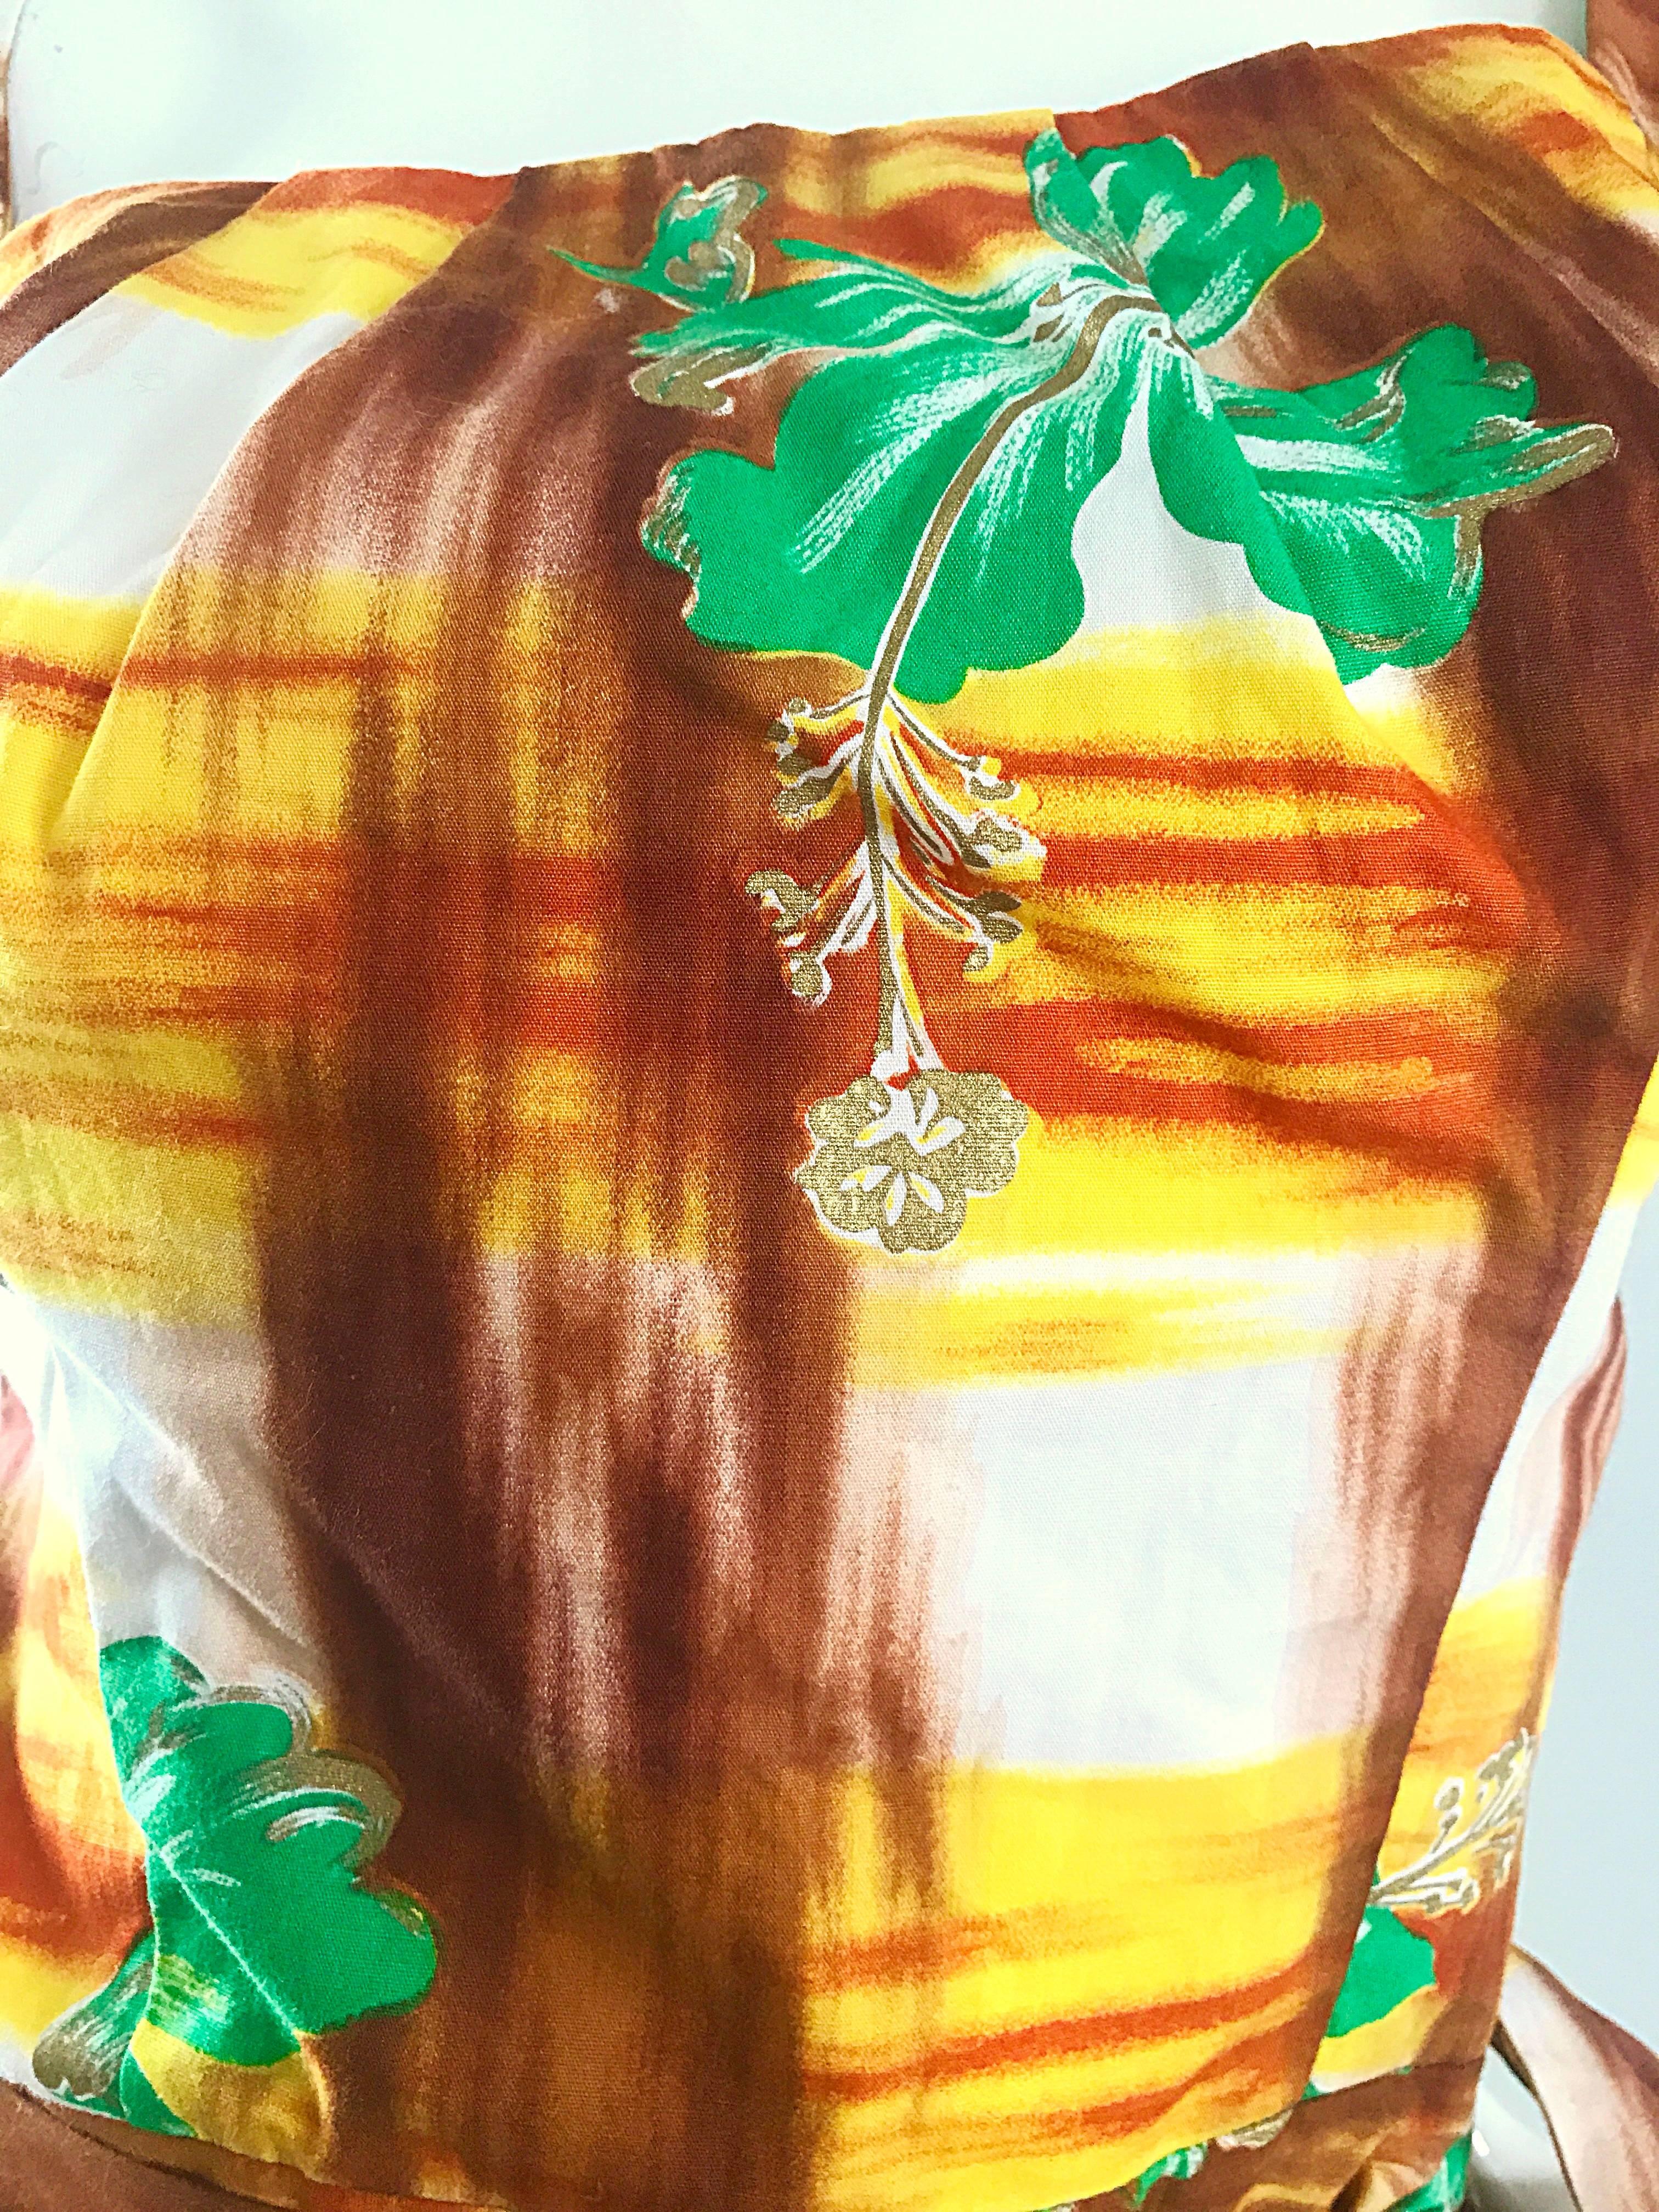 Beautiful 1950s KAMEHAMEHA hand painted vintage cotton wrap dress! Features vibrant handpainted prints in yellow, green, orange, gold, brown and white. Sarong style wrap ties shut at the left waist. Full metal zipper up the side with hook-and-eye